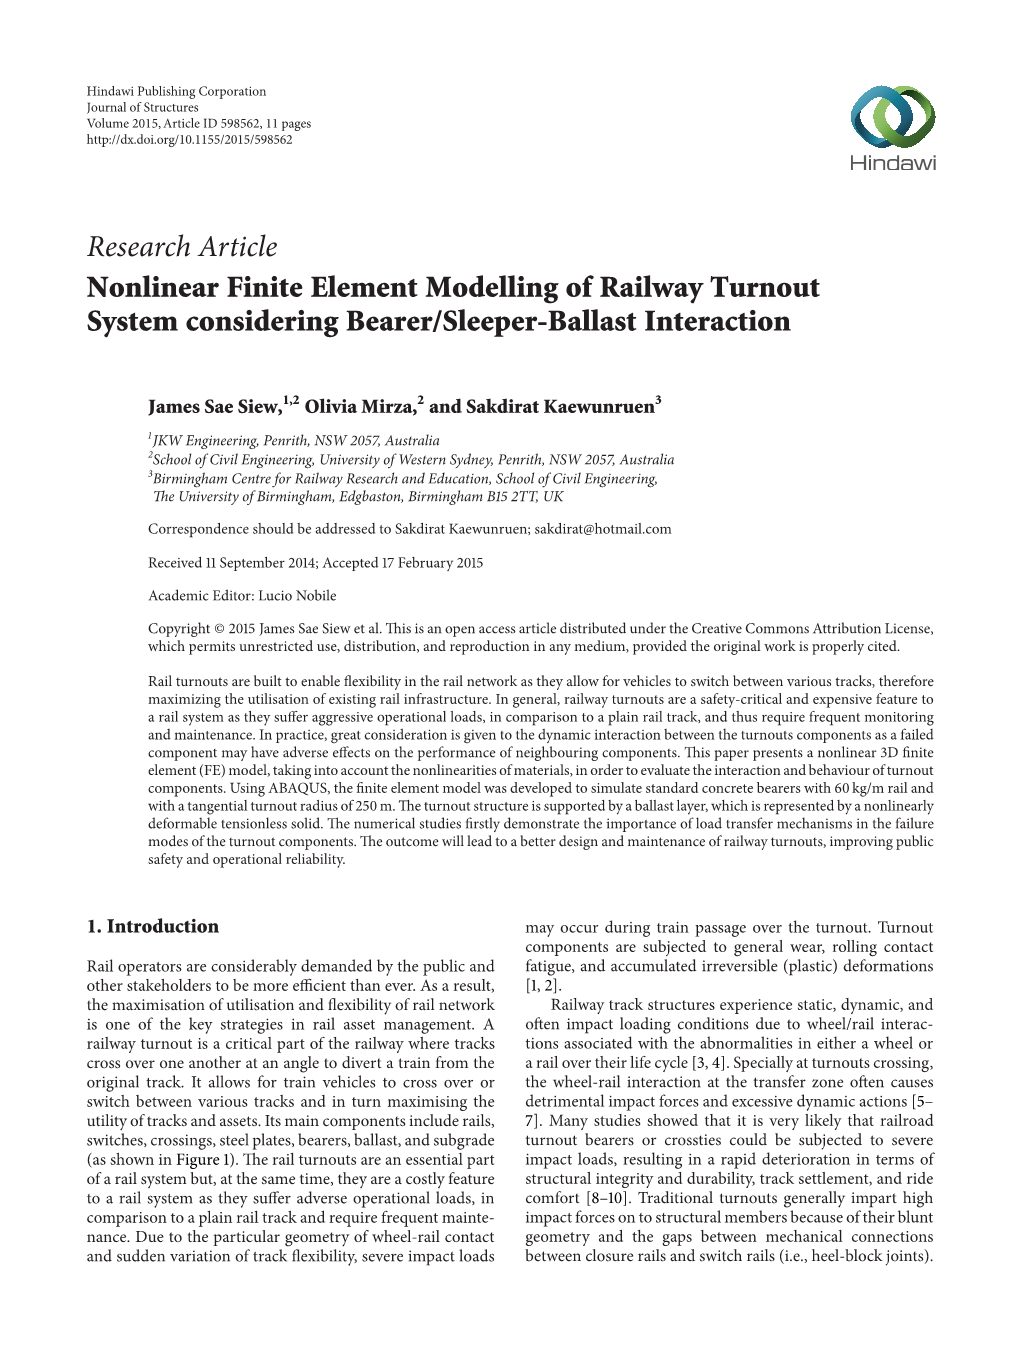 Research Article Nonlinear Finite Element Modelling of Railway Turnout System Considering Bearer/Sleeper-Ballast Interaction